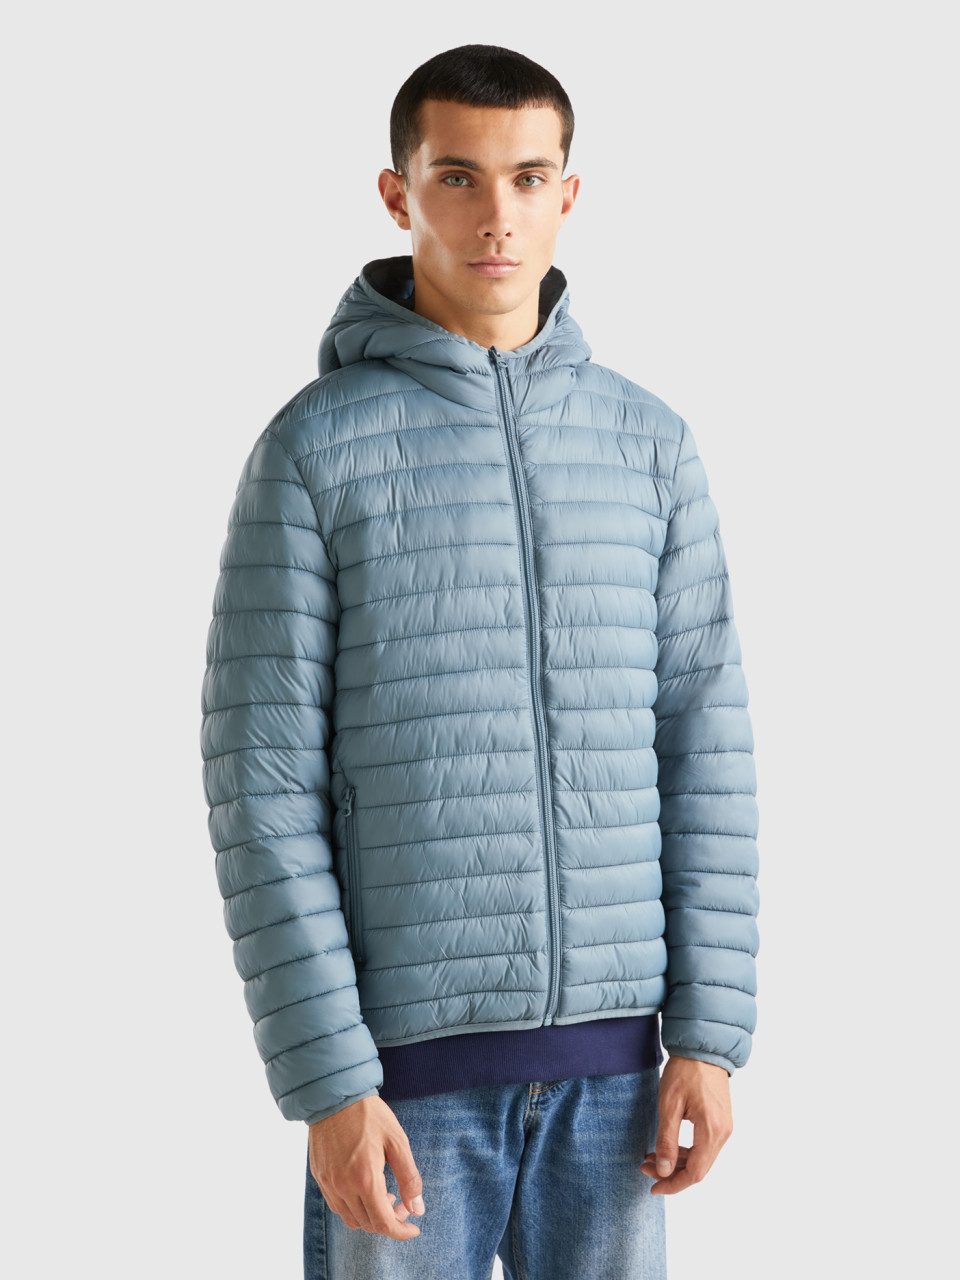 Benetton, Padded Jacket With Recycled Wadding, Sky Blue, Men